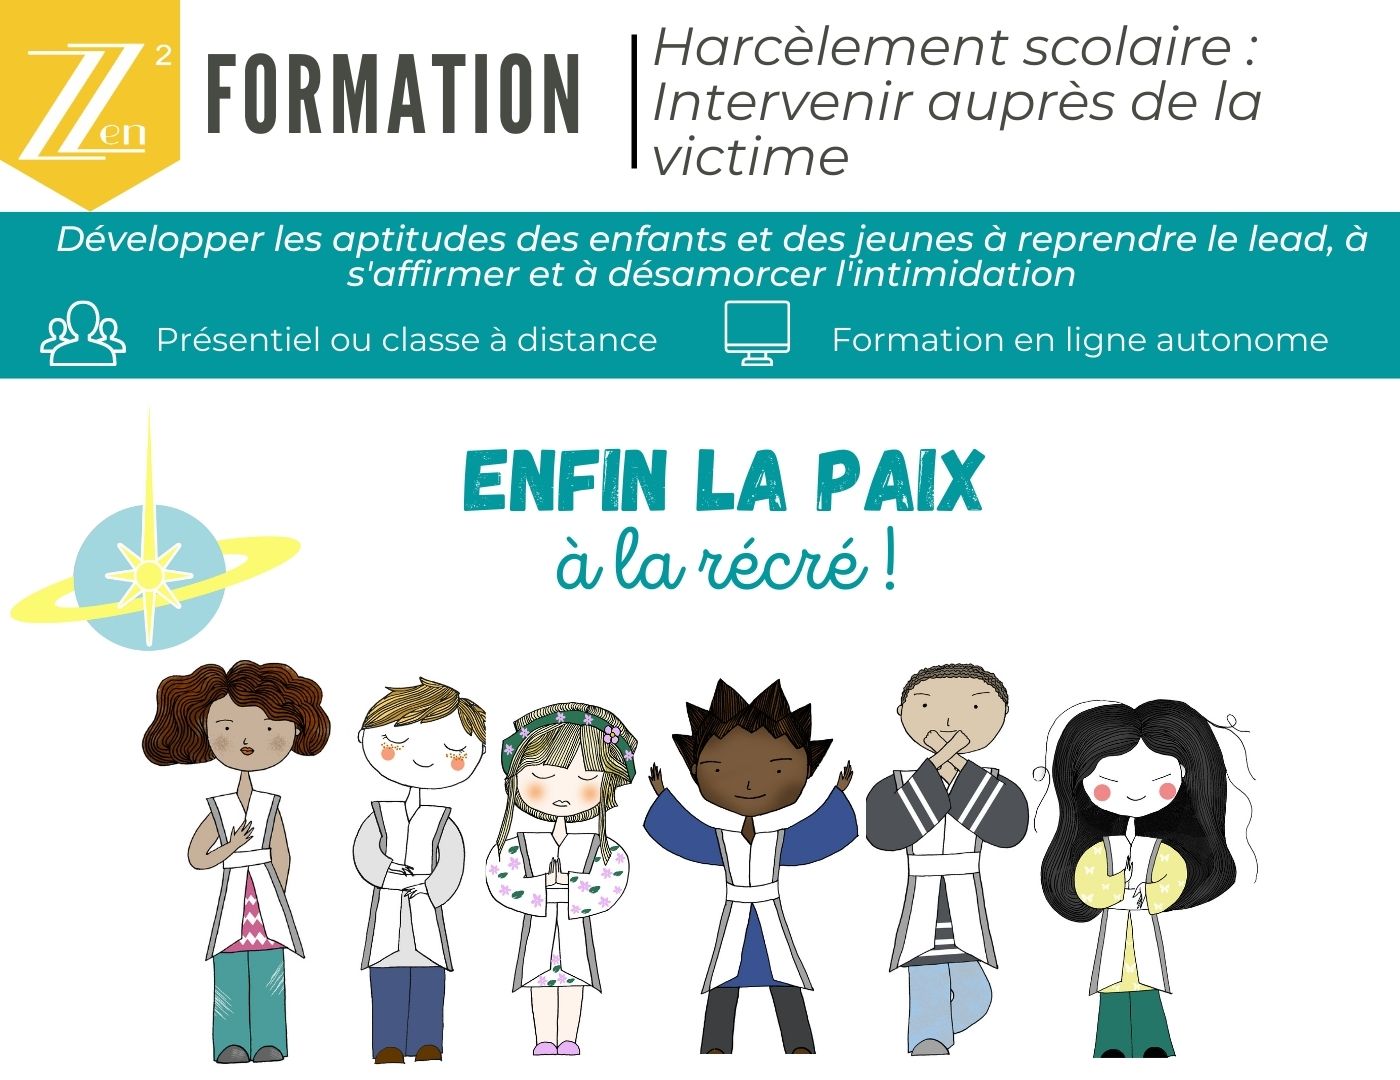 formations-accompagnement-victime-harcelement-scolaire